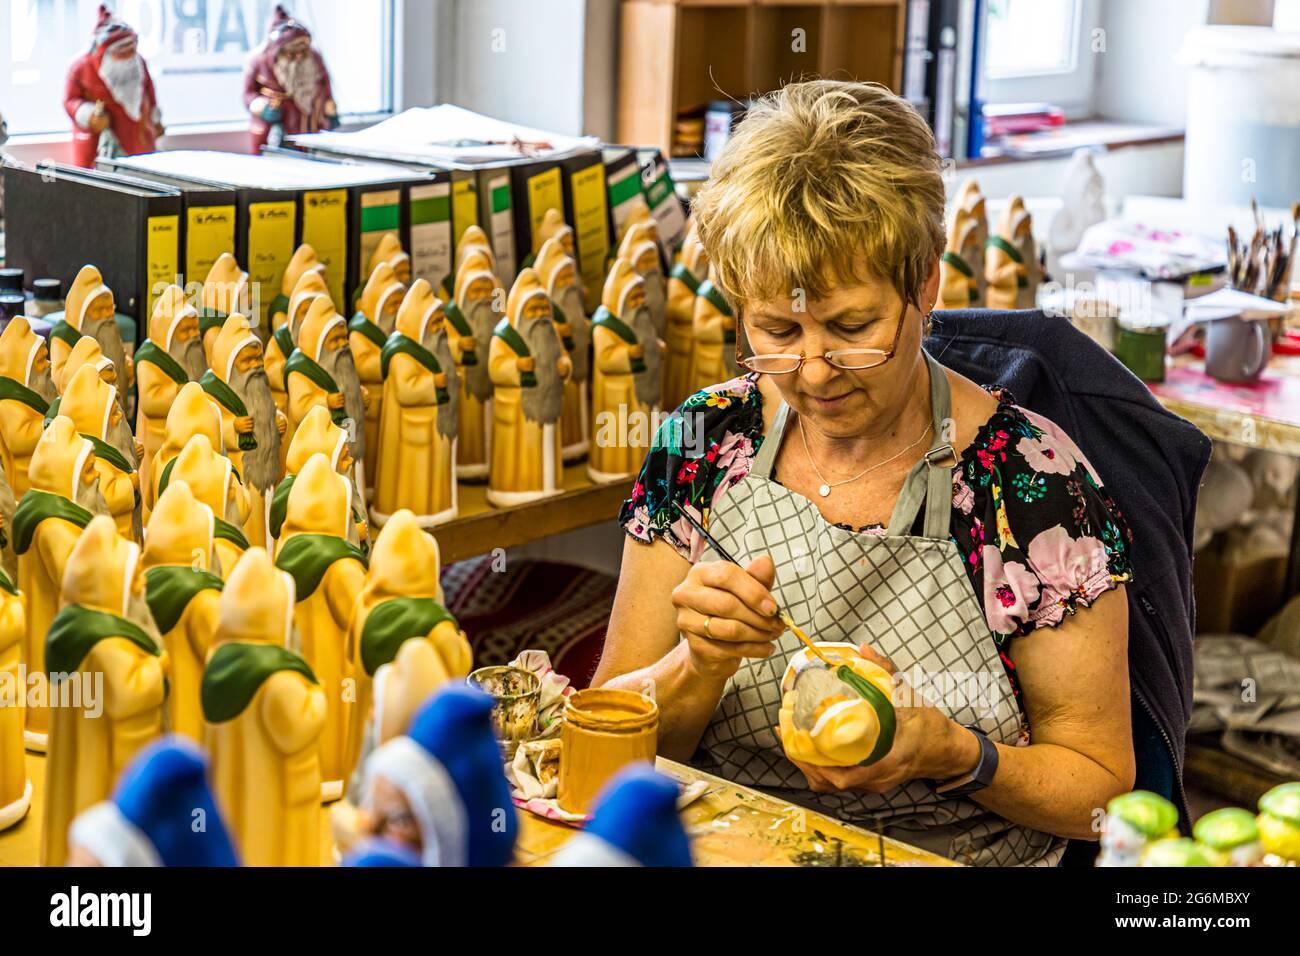 Marolin Manufacture founded by Richard Mahr produces finely detailed Papier-Mache Figurines in Steinach, Germany Stock Photo